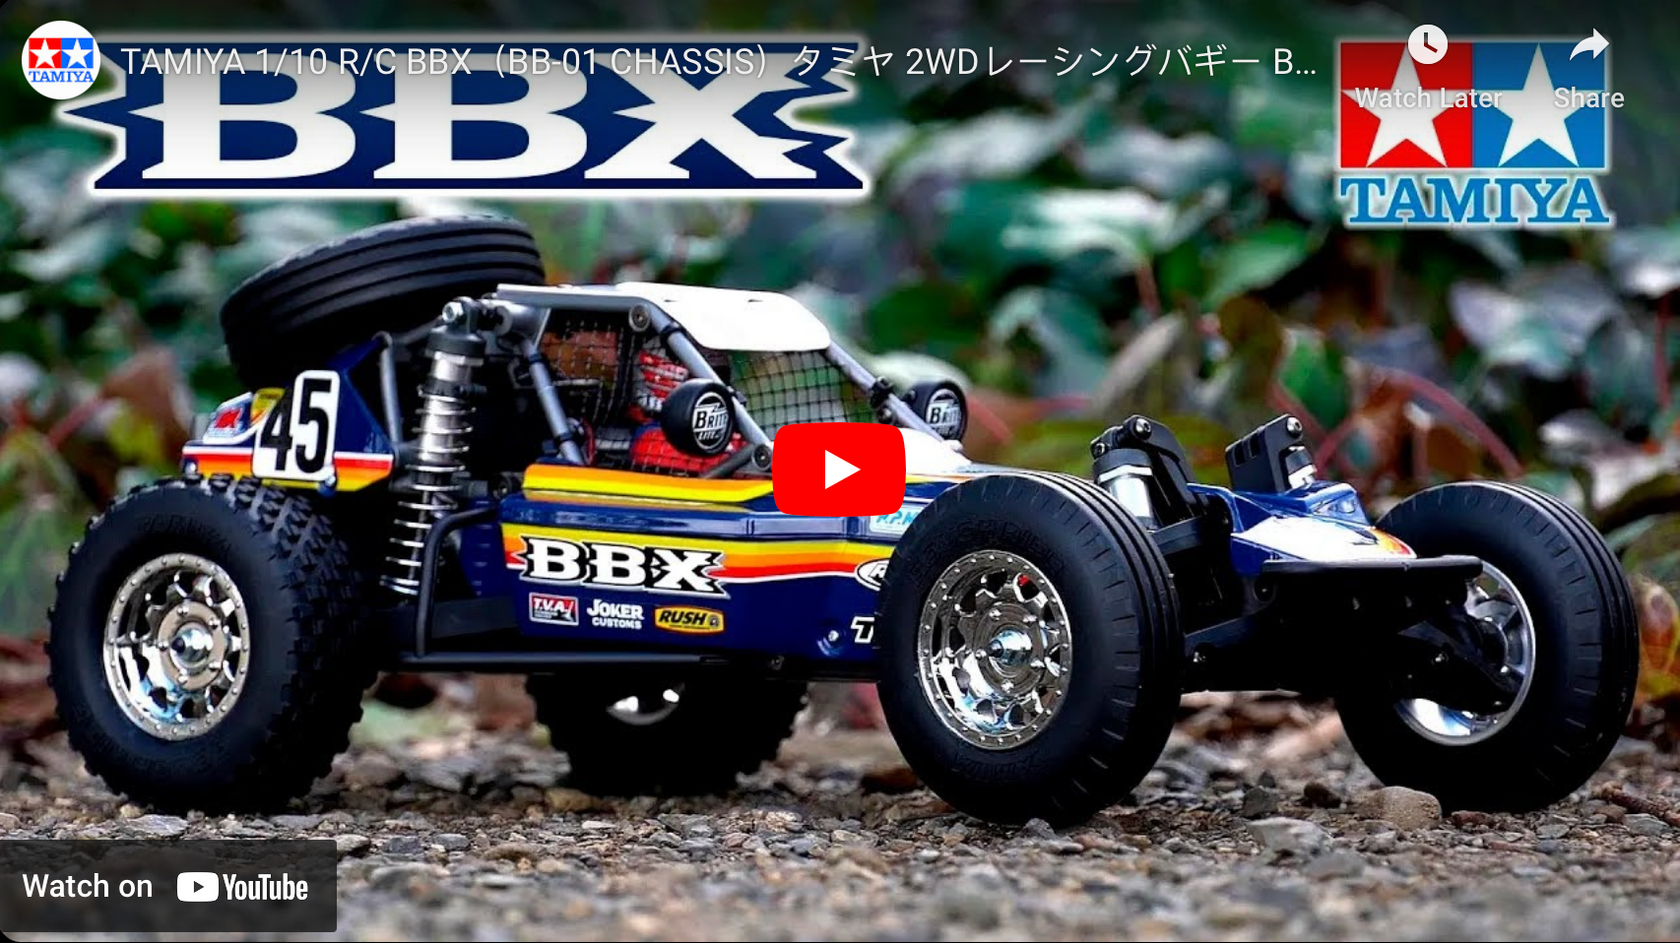 This is a photo of the New Tamiya BBX Radio Control Buggy. It has retro styling but is on a Brand New Chassis. Now available to purchase at Slick-Shifts.